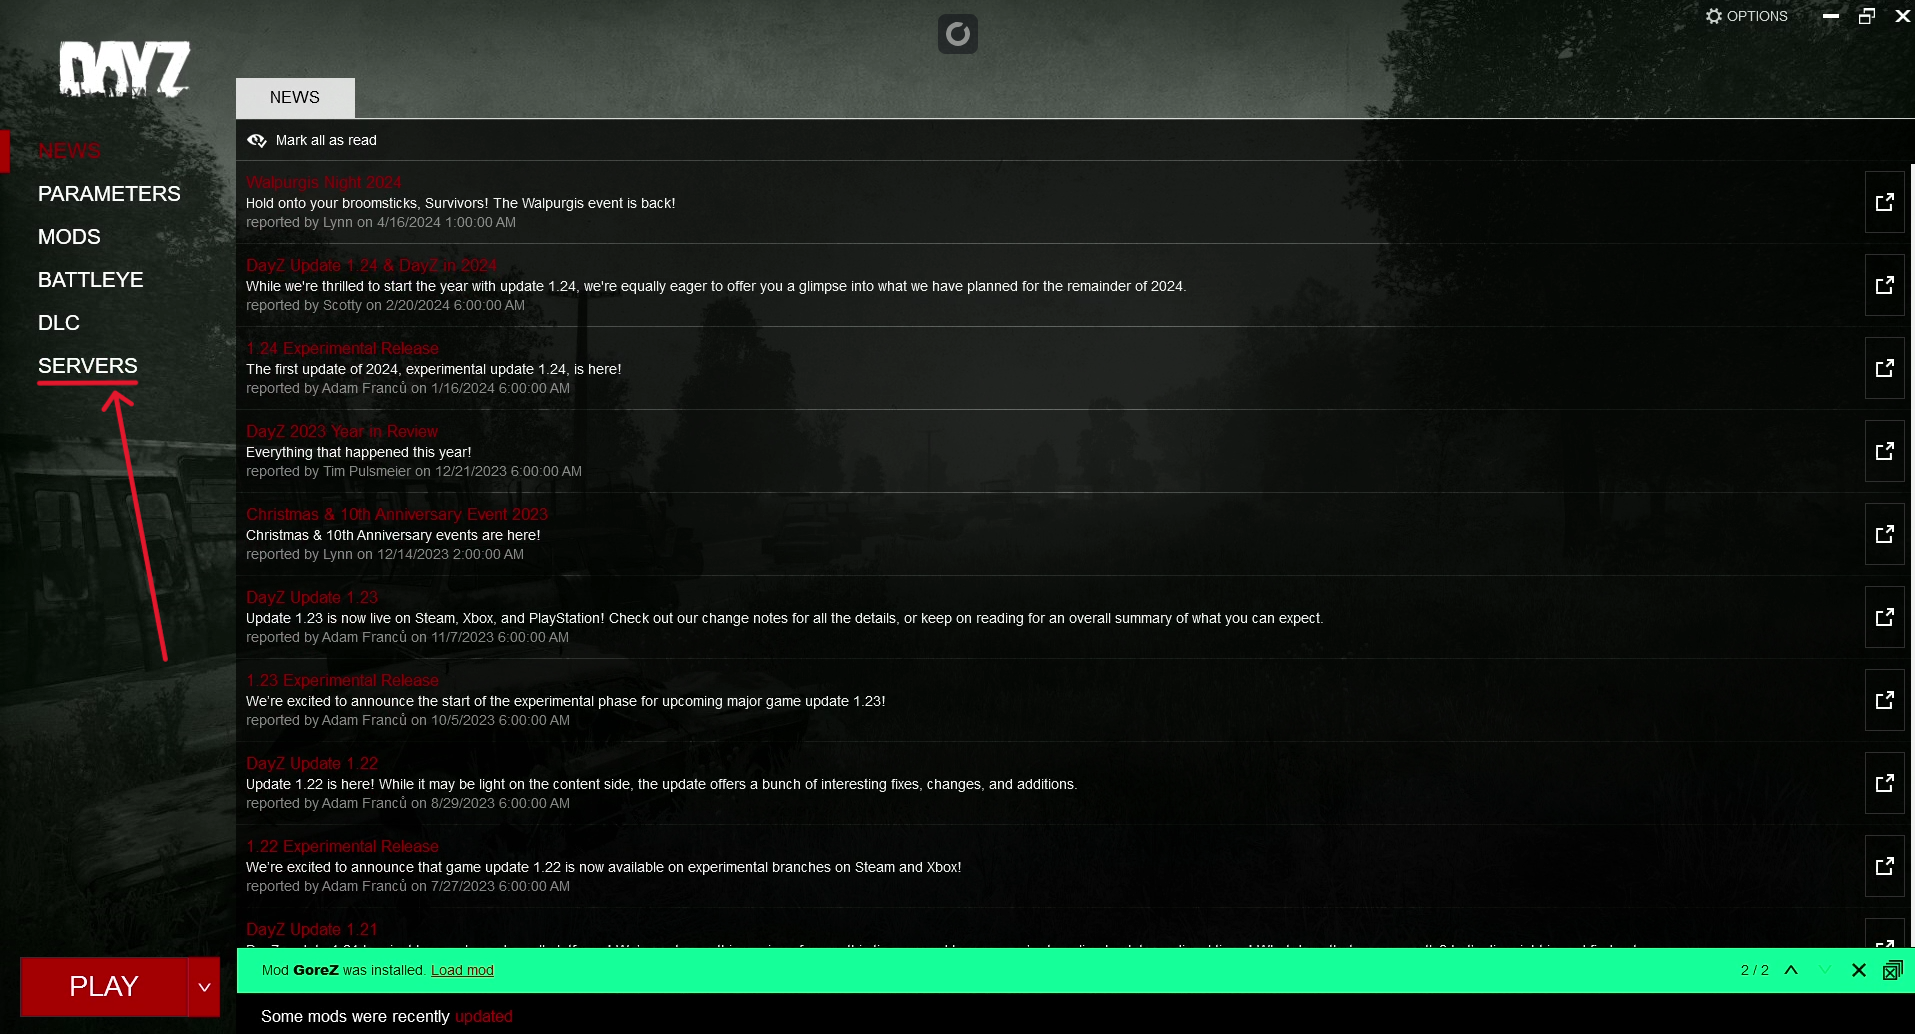 DayZ Launcher - Click on Servers section